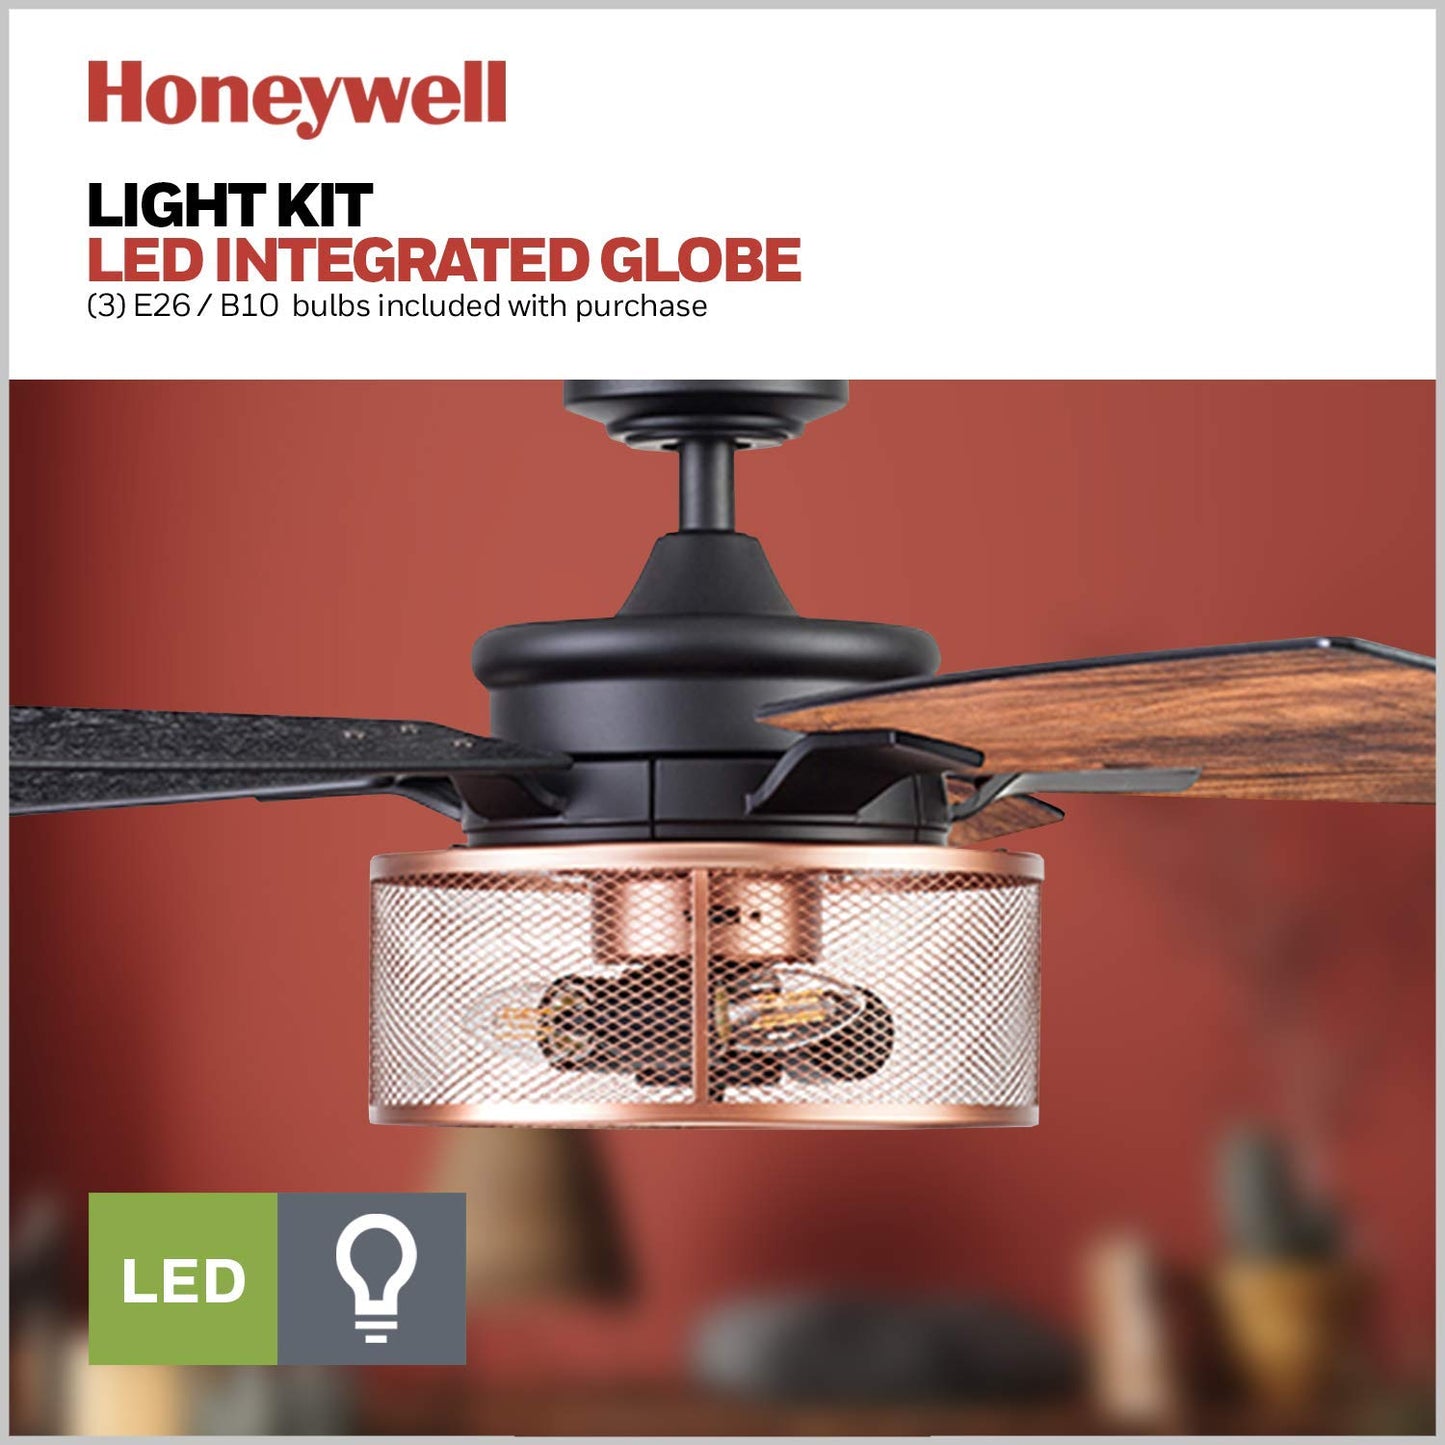 Honeywell Ceiling Fans Carnegie, 52 Inch Industrial Style Indoor LED Ceiling Fan with Light, Remote Control, Dual Mounting Options, 5 Dual Finish Blades, Reversible Airflow - 51459-01 (Copper)